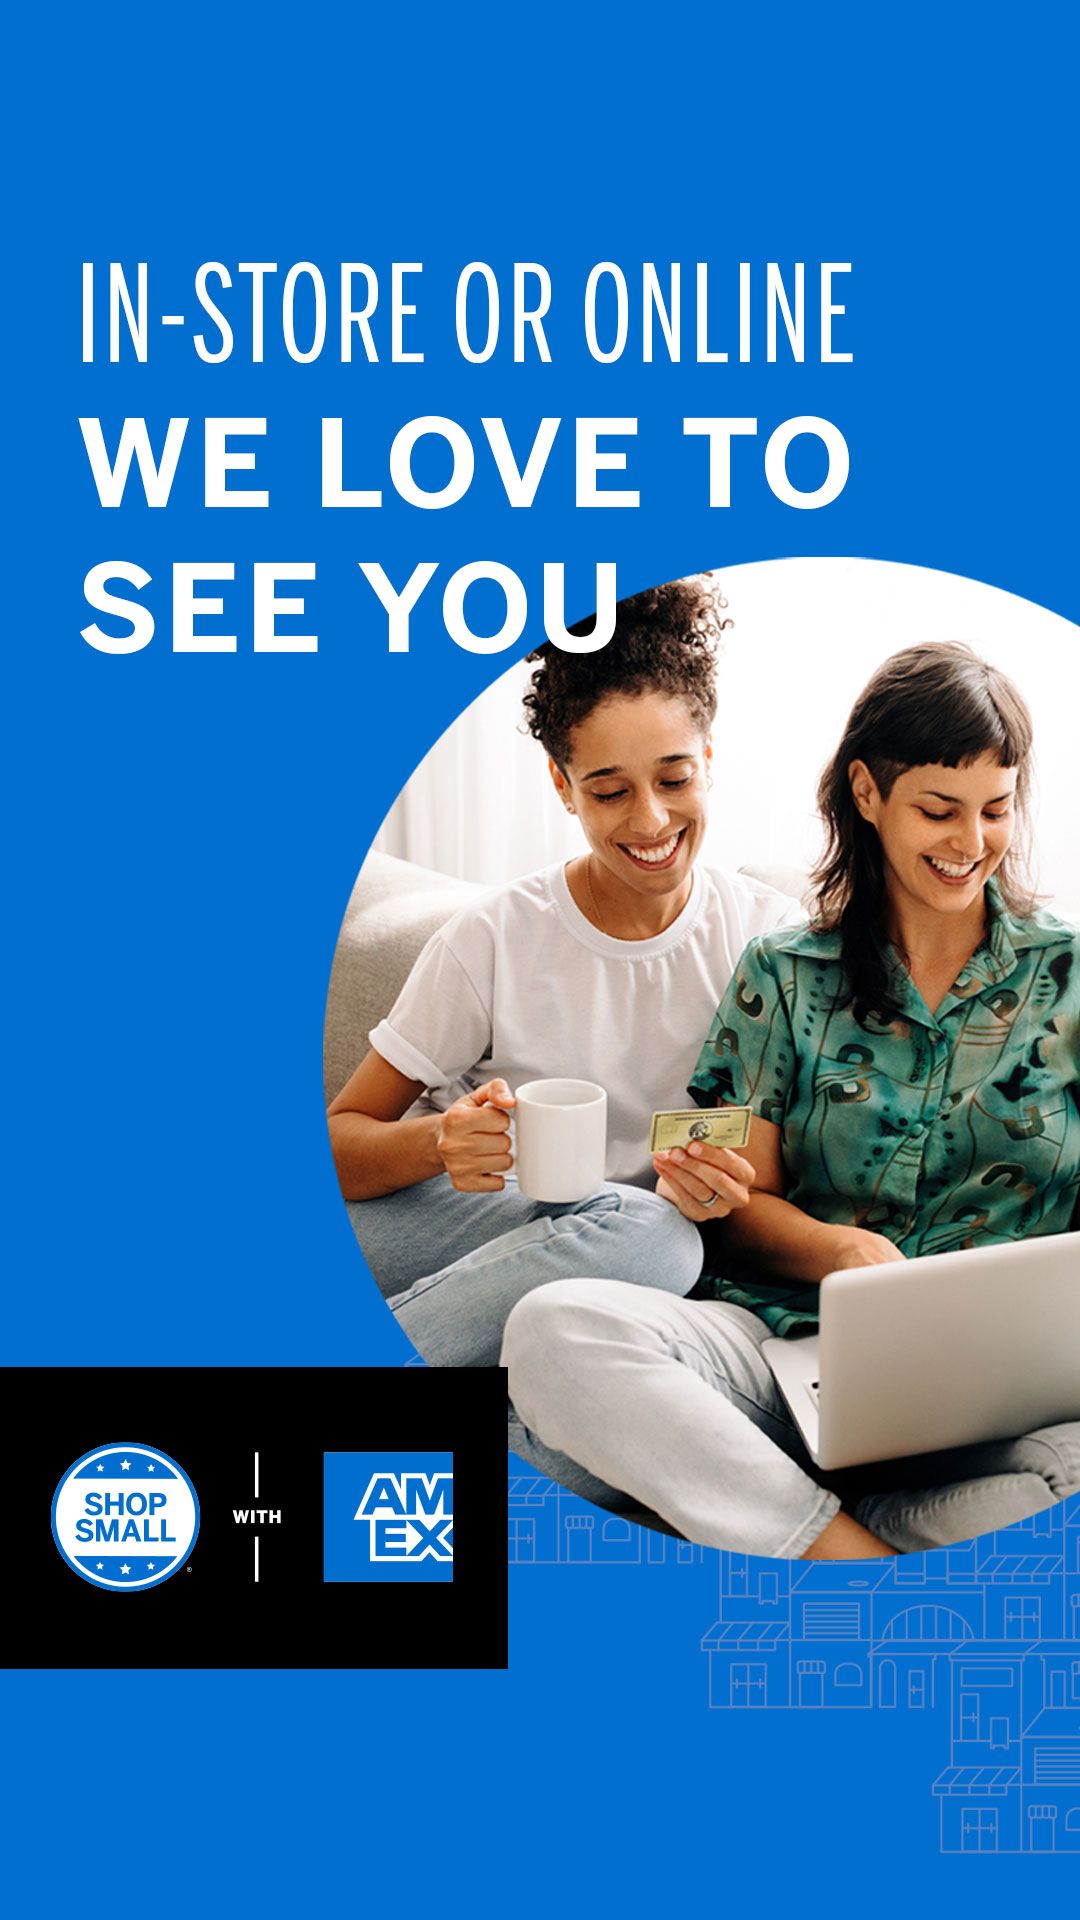 Graphic with an image of two women sitting on the couch looking at laptop and reading Amex credit card number for online purchase. Message overlaid says In-store or online - we love to see you and includes the Shop small with Amex logo